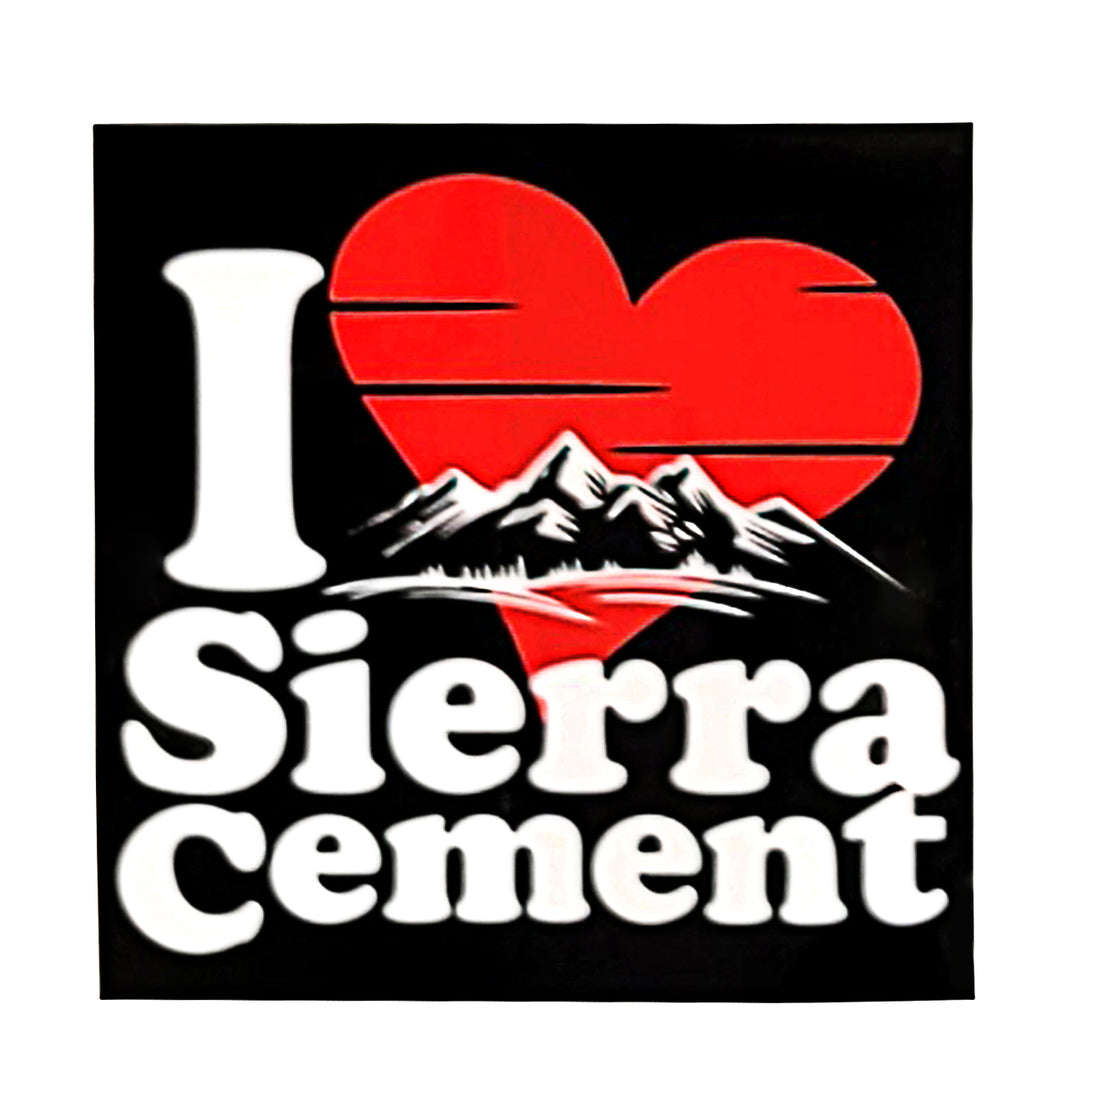 "I Heart Sierra Cement" Products by The Mammoth Brand